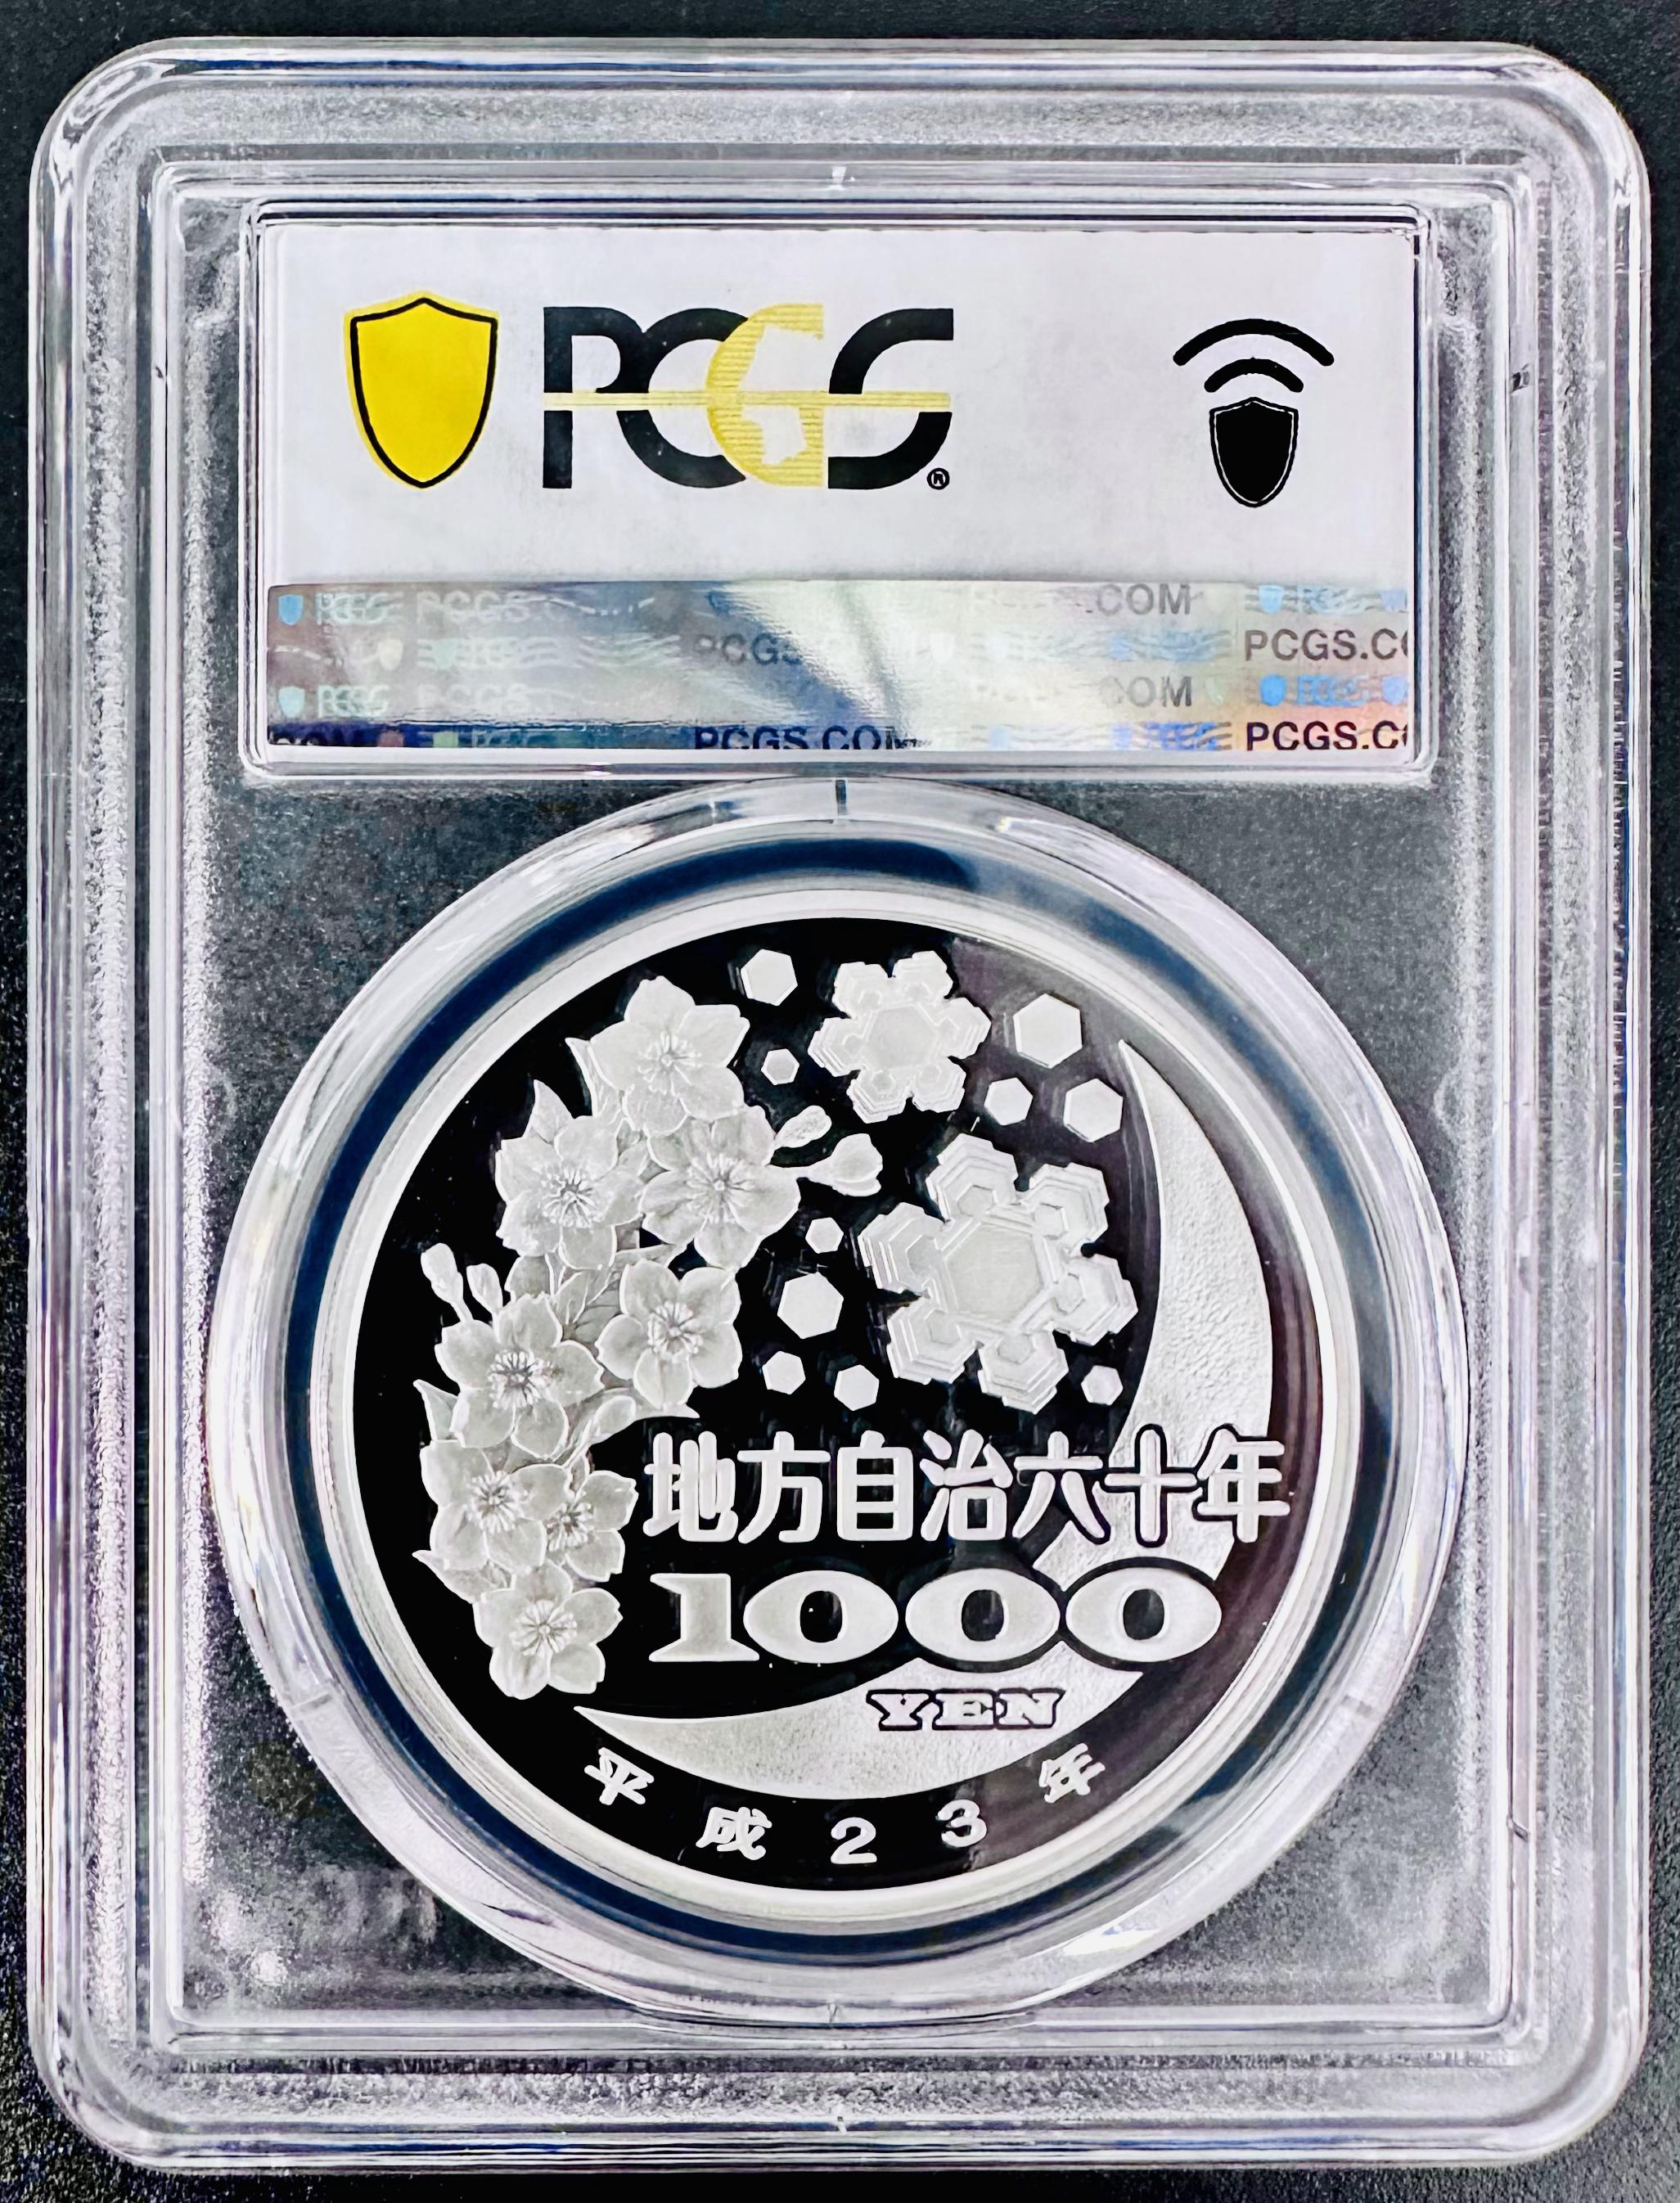 PCGS local government law . line 60 anniversary commemoration thousand jpy silver coin . proof money set Iwate prefecture local government thousand jpy silver coin 1000 jpy silver coin 